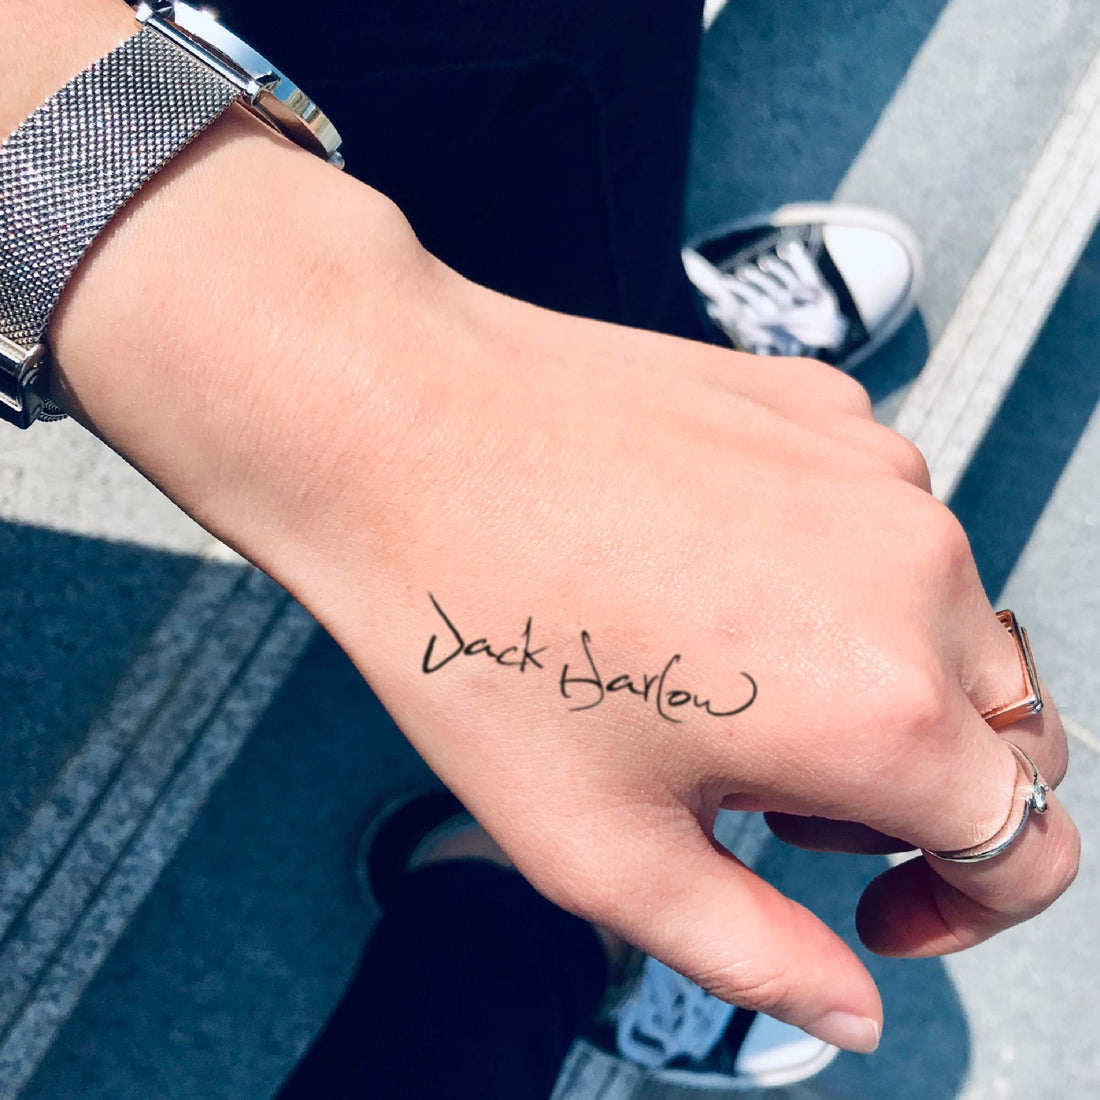 Jack Harlow custom temporary tattoo sticker design idea inspiration meanings removal arm wrist hand words font name signature calligraphy lyrics tour concert outfits merch accessory gift souvenir costumes wear dress up code